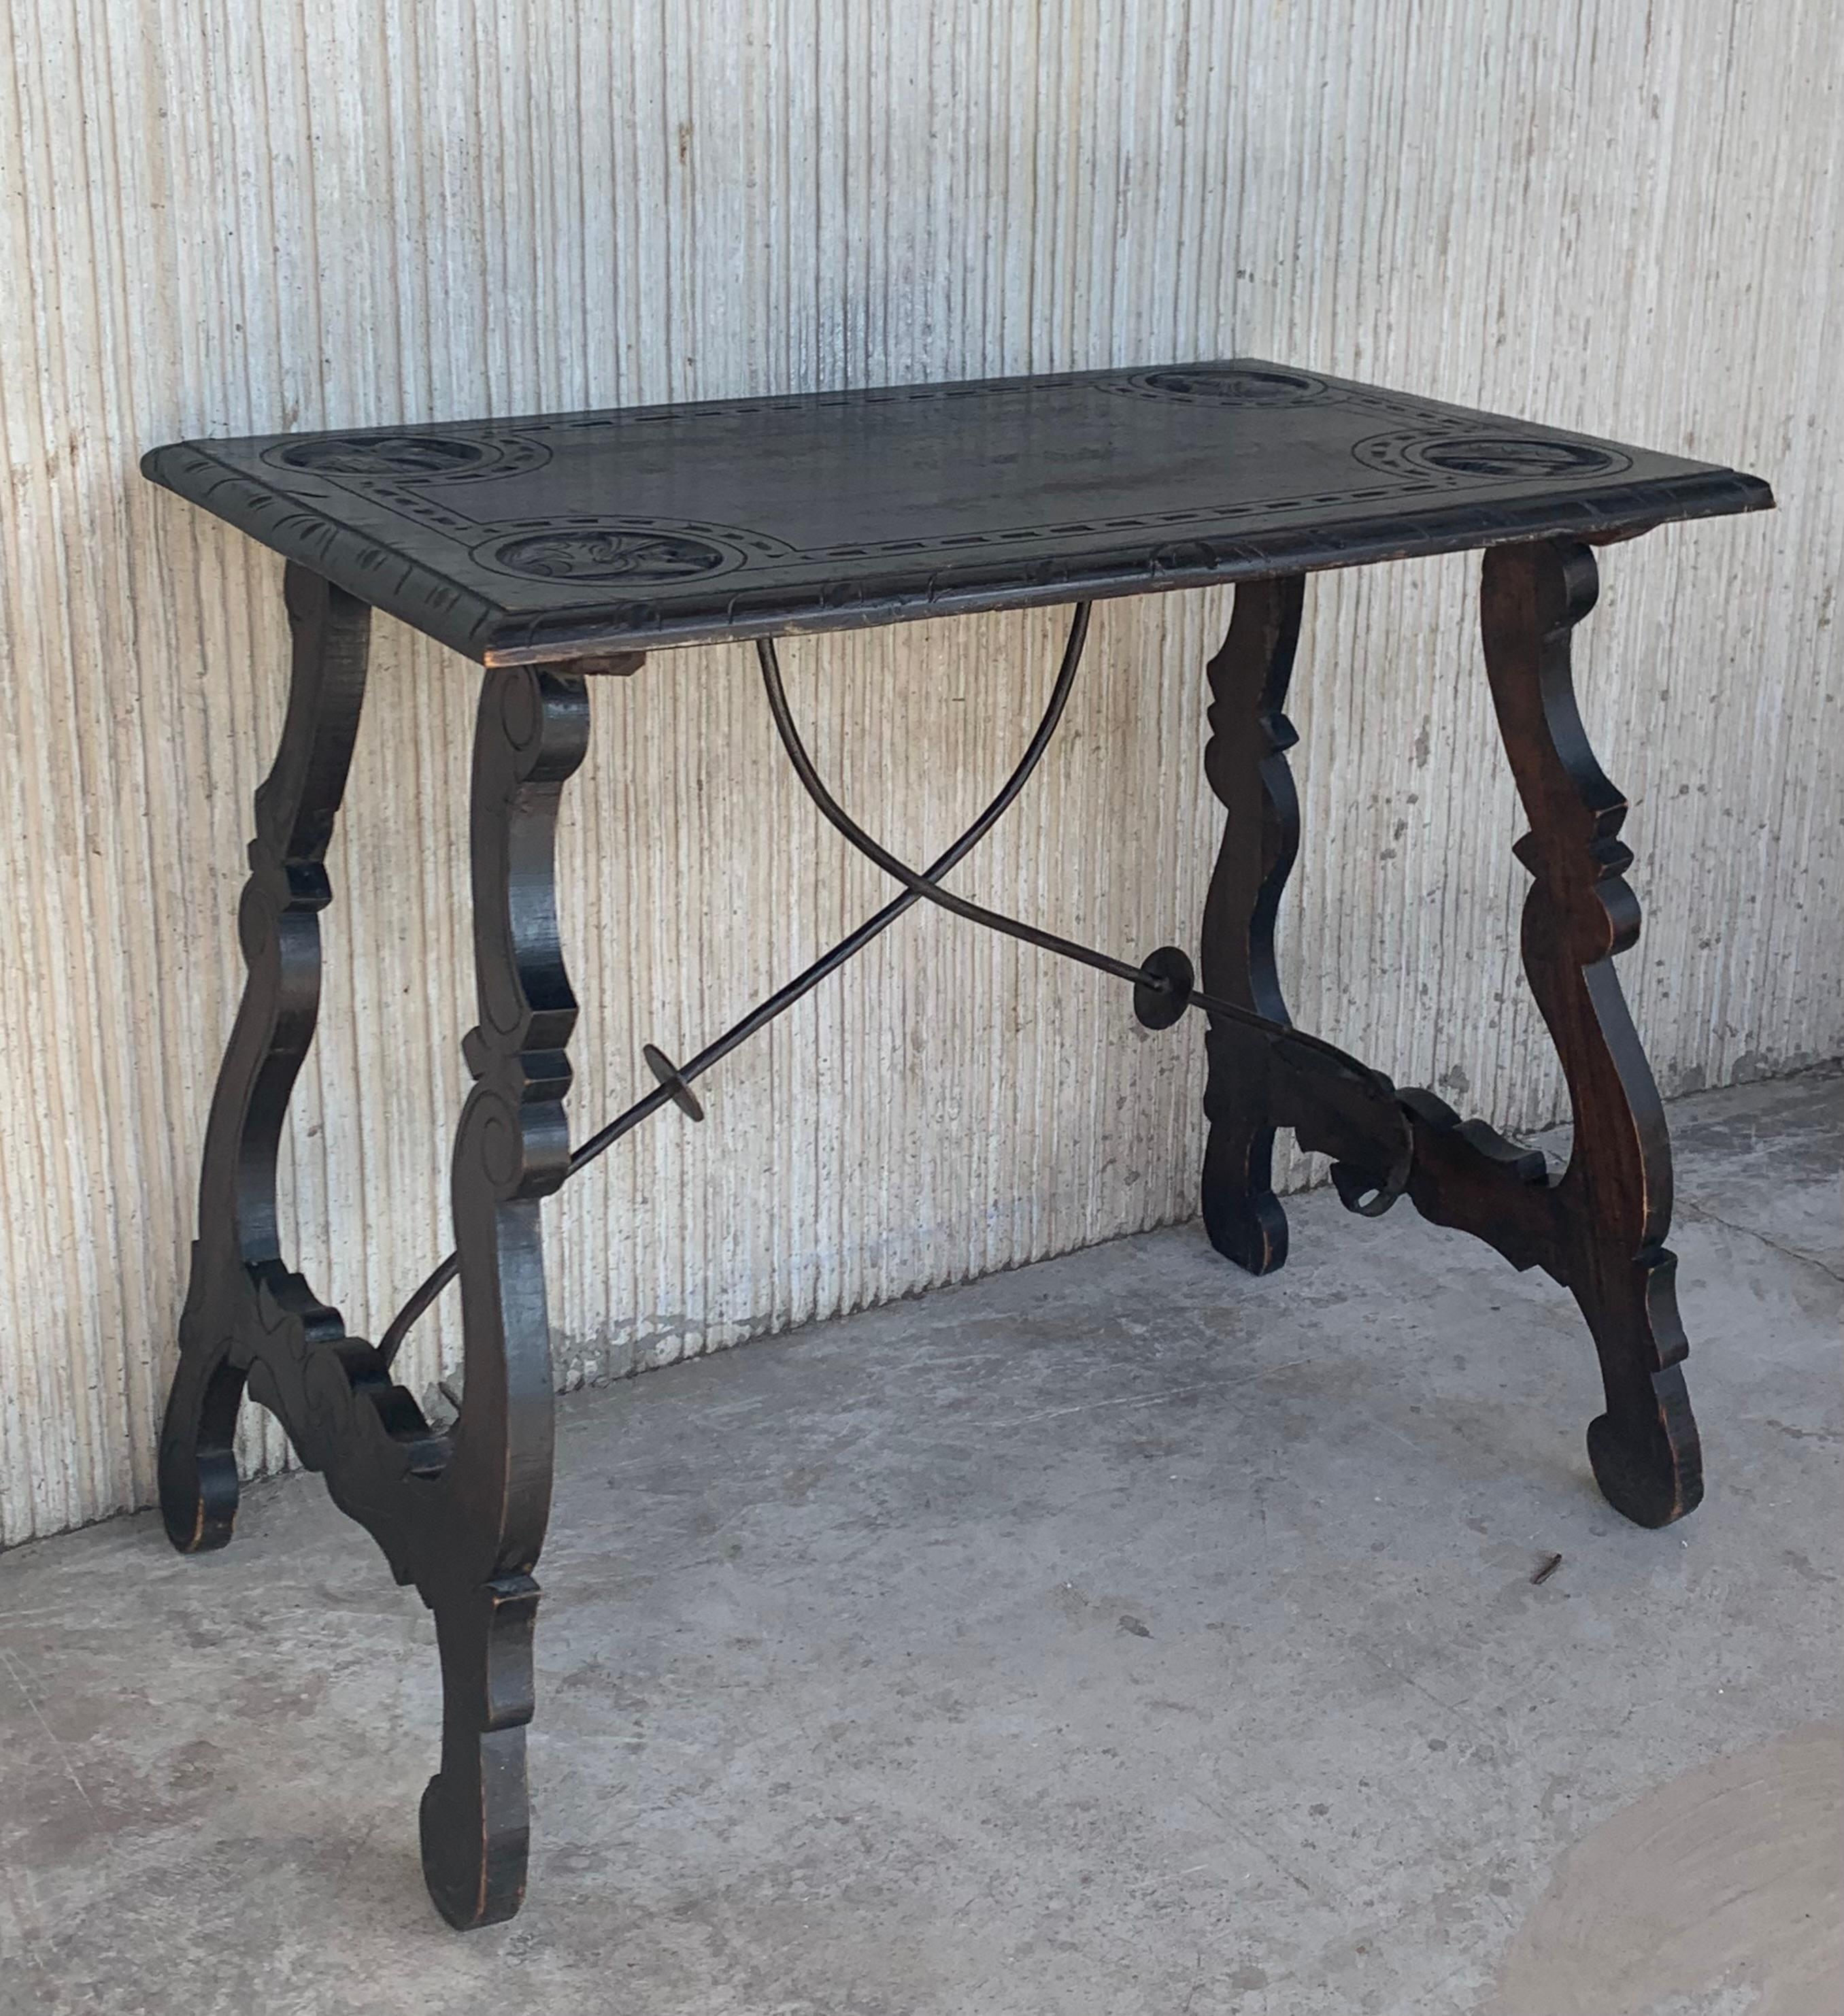 19th century Spanish Baroque side table with carved top and carved edgeds
Beautiful carved lyre legs and iron stretcher.